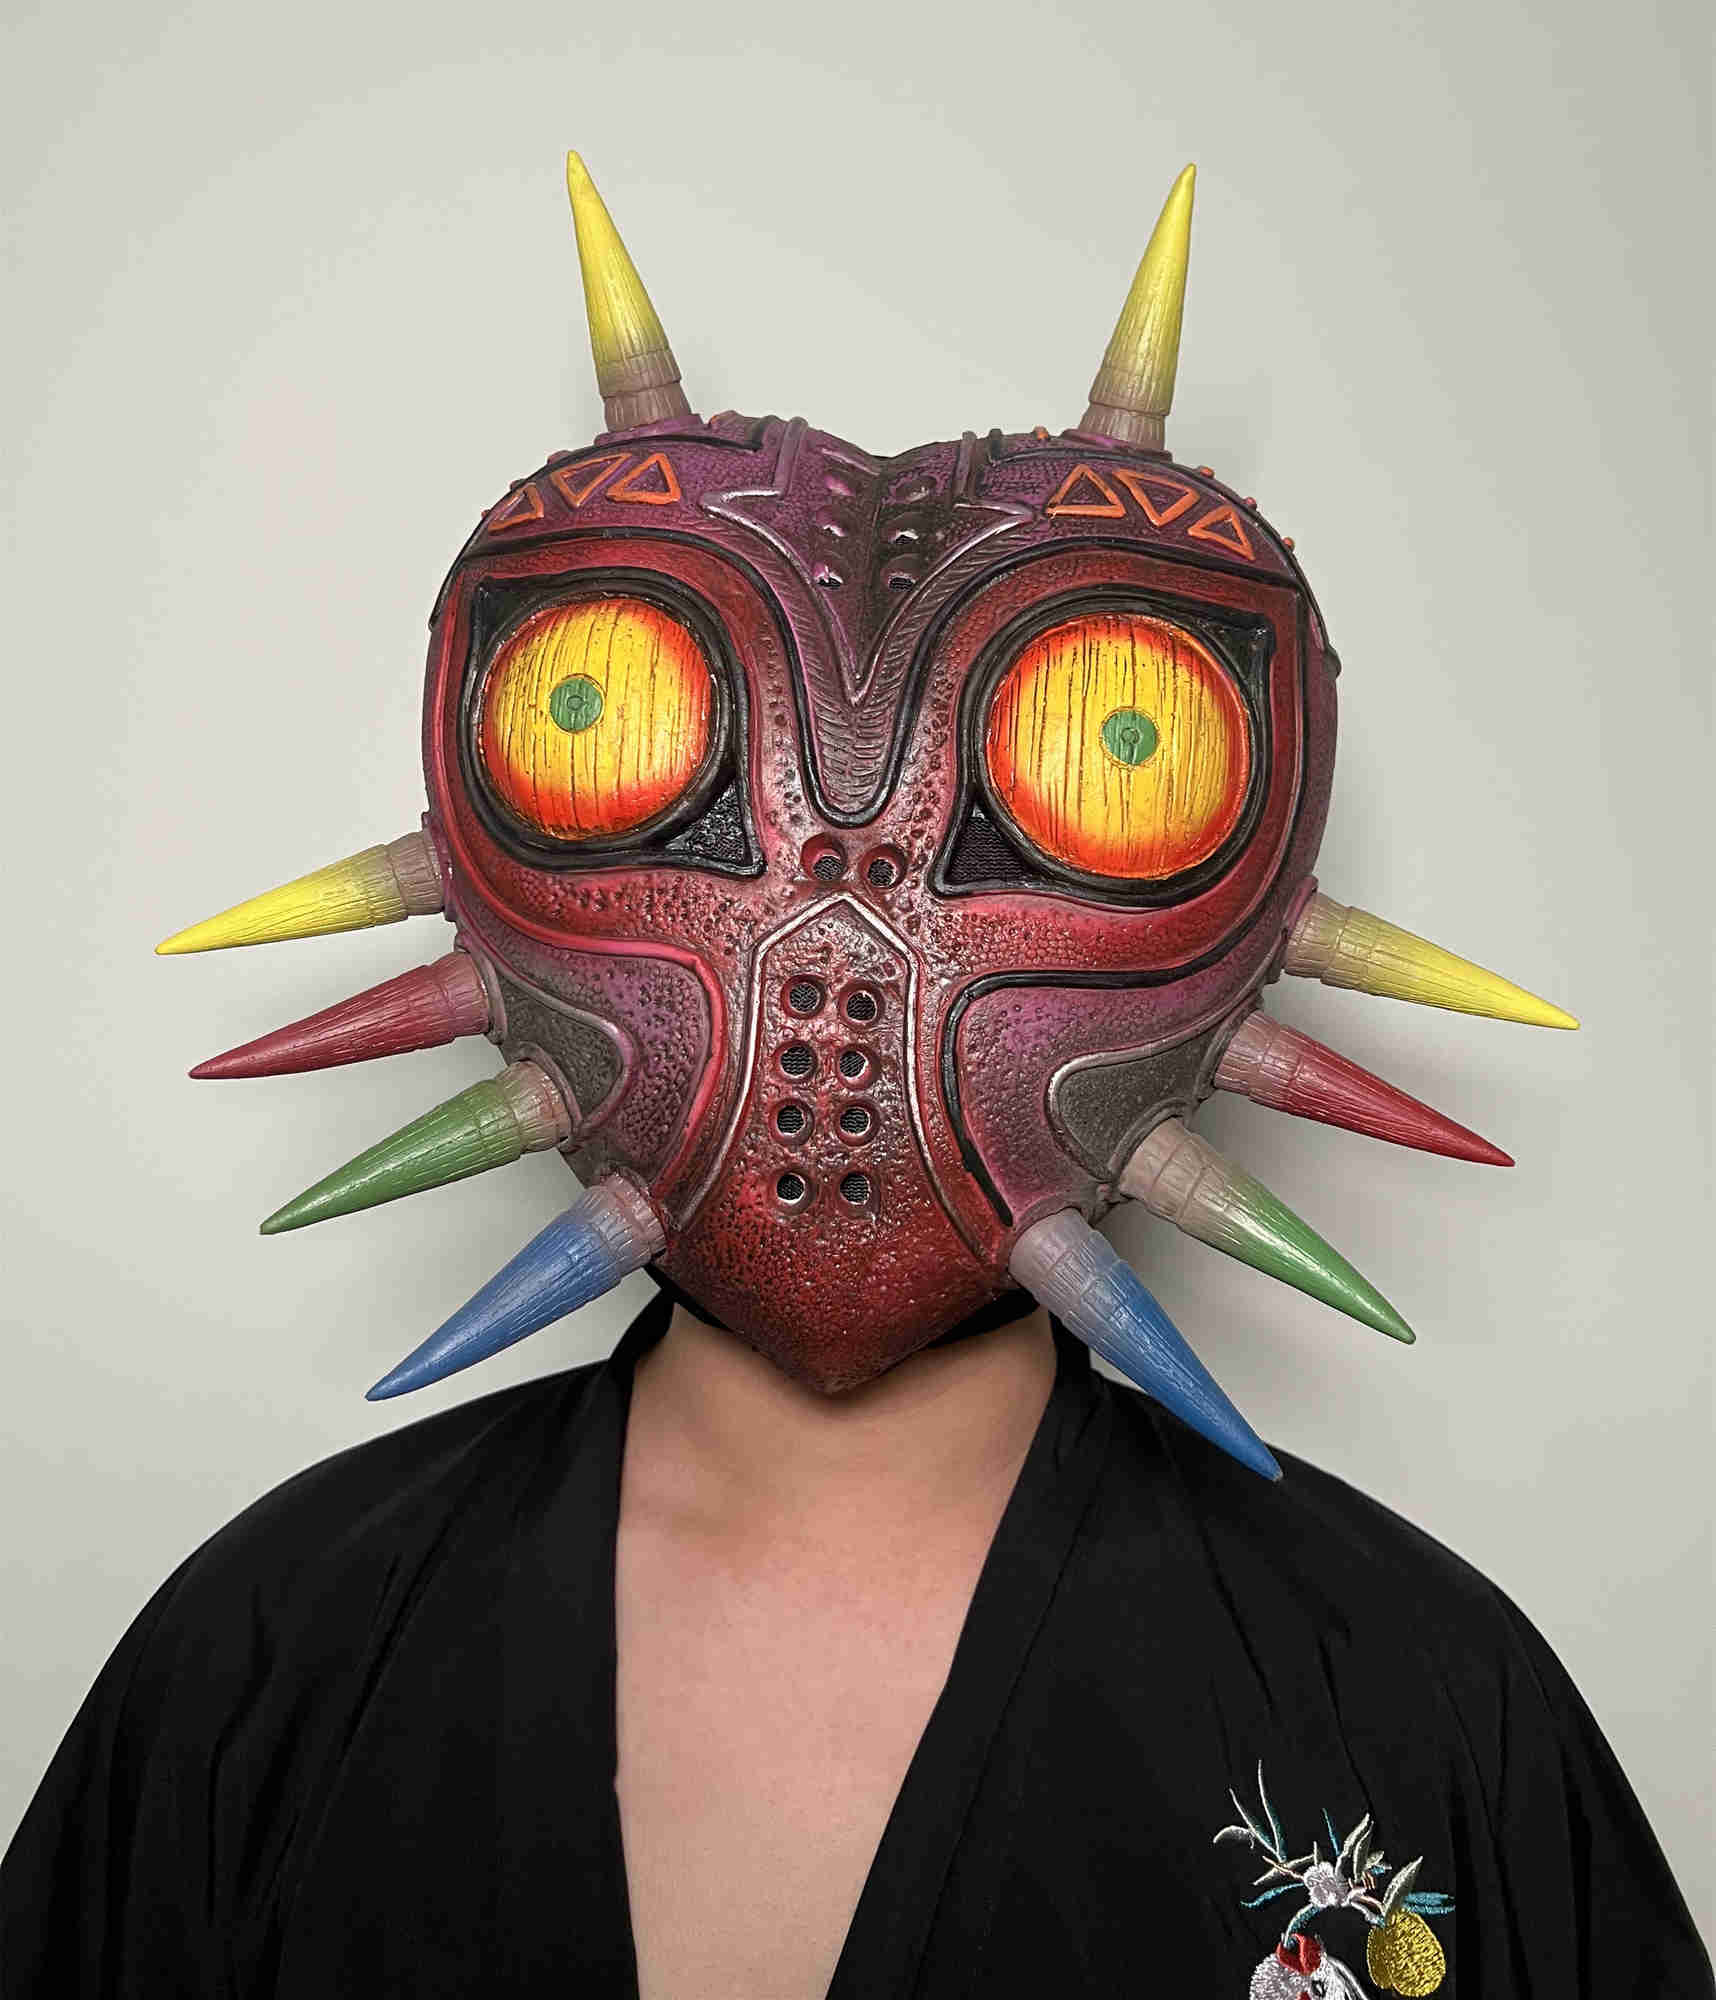 Majora's Mask Legend of Zelda Scary Realistic Face Mask Halloween Cosplay Costume Prop for Adults Teens HKD230810